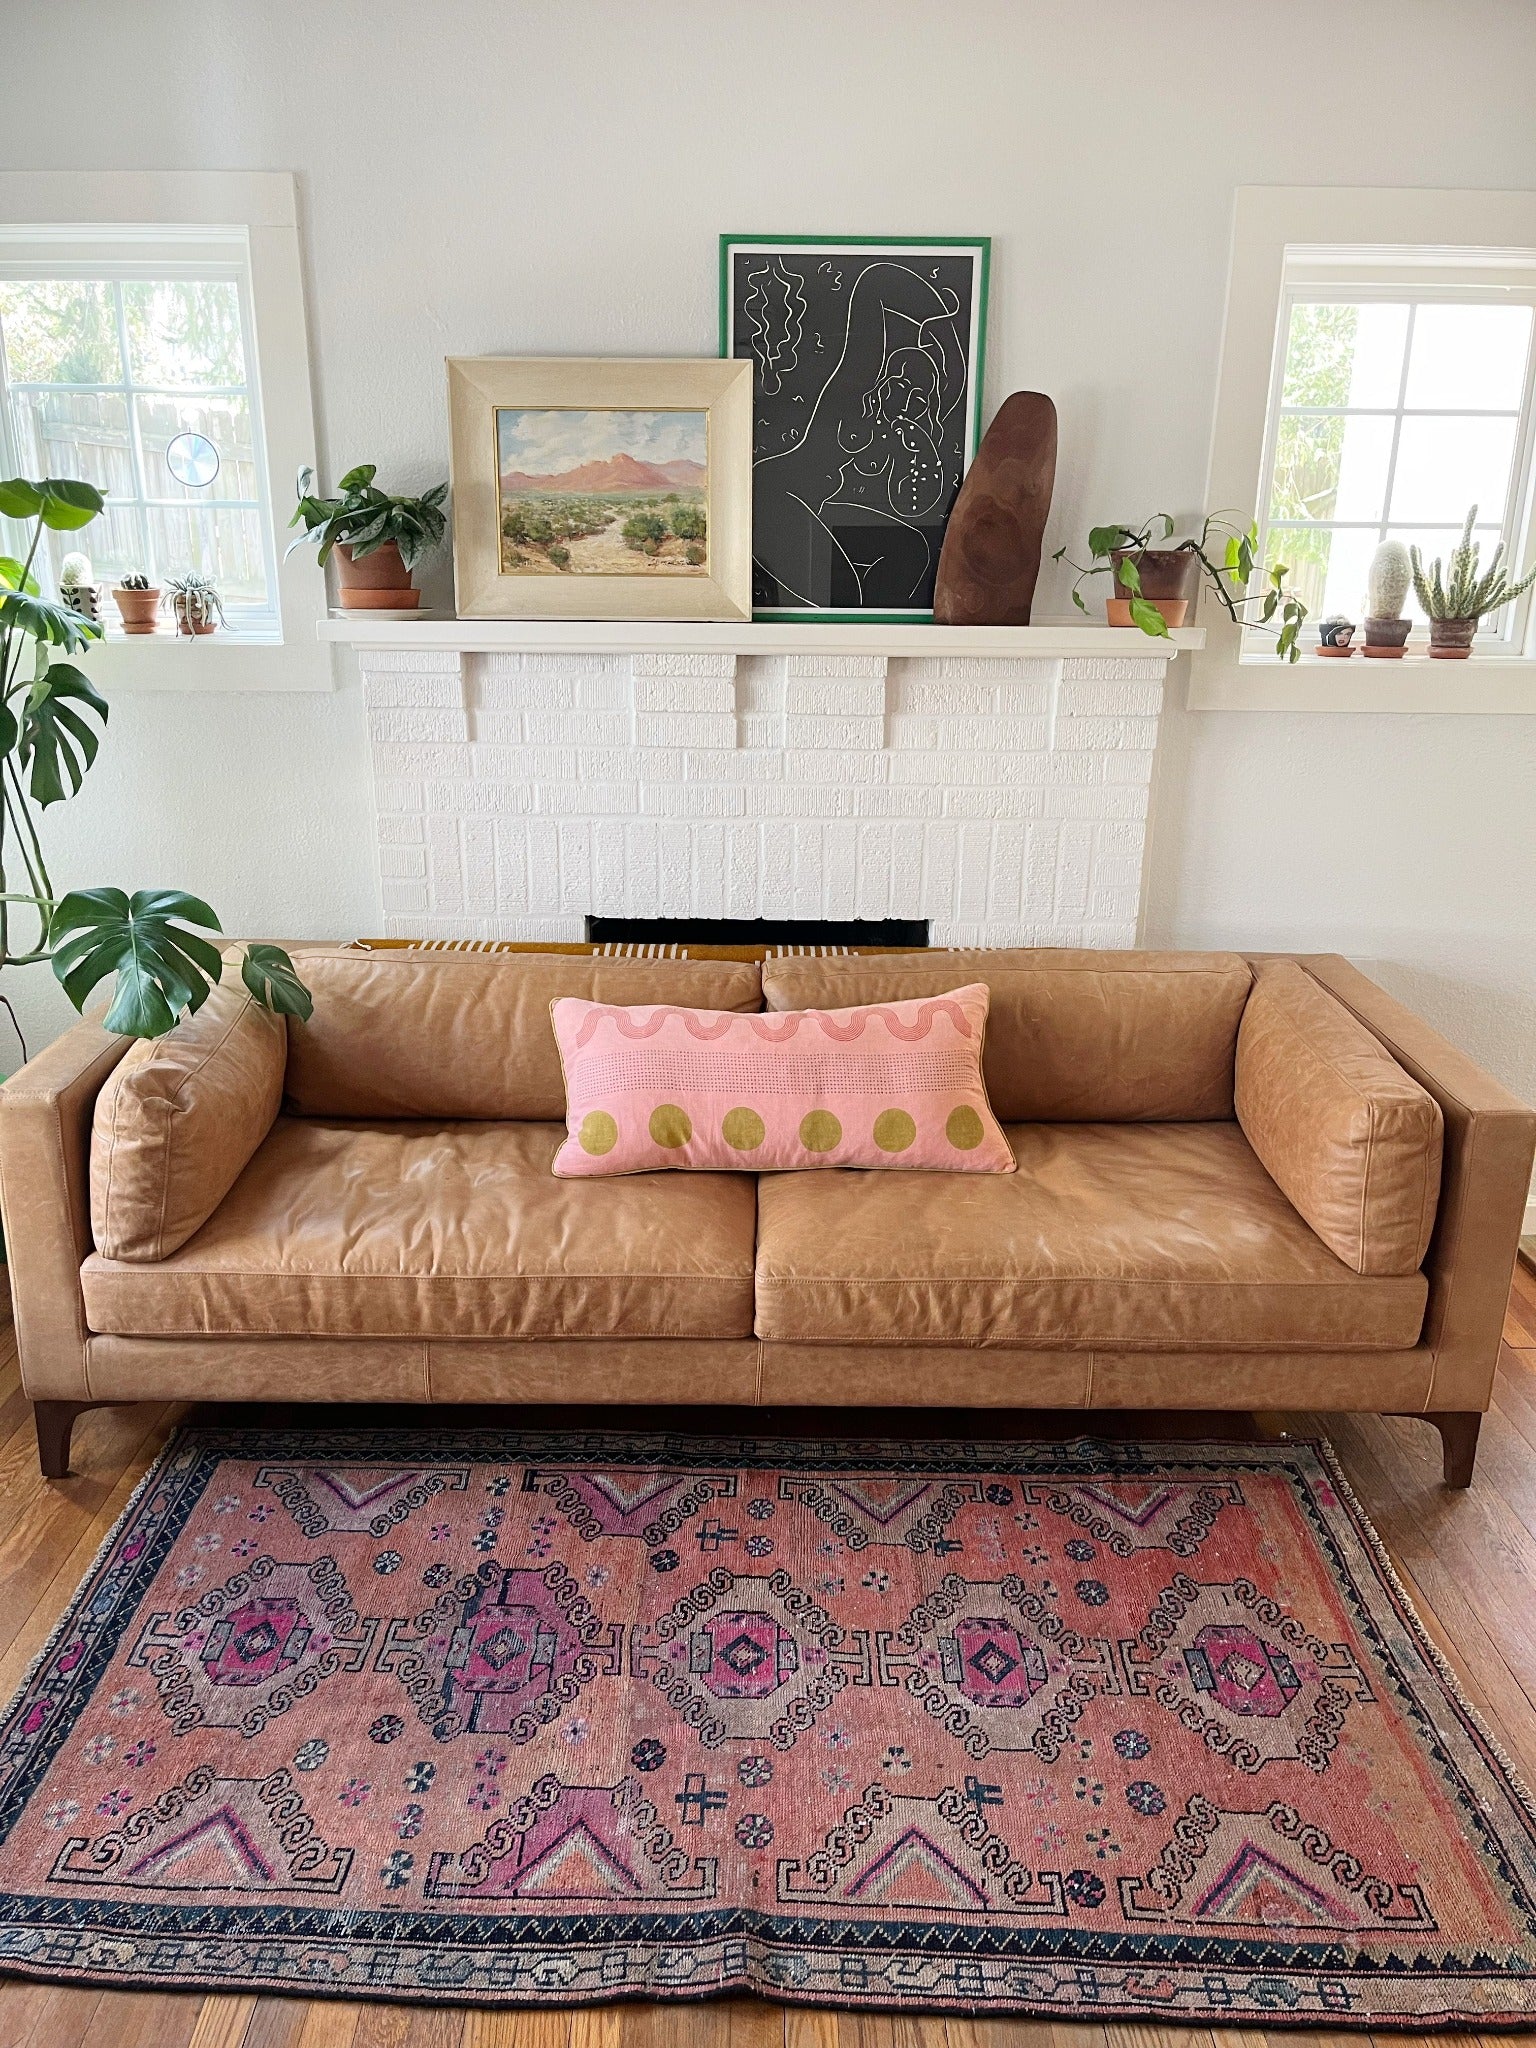 See Birch Vintage Persian Rug in a Living Room